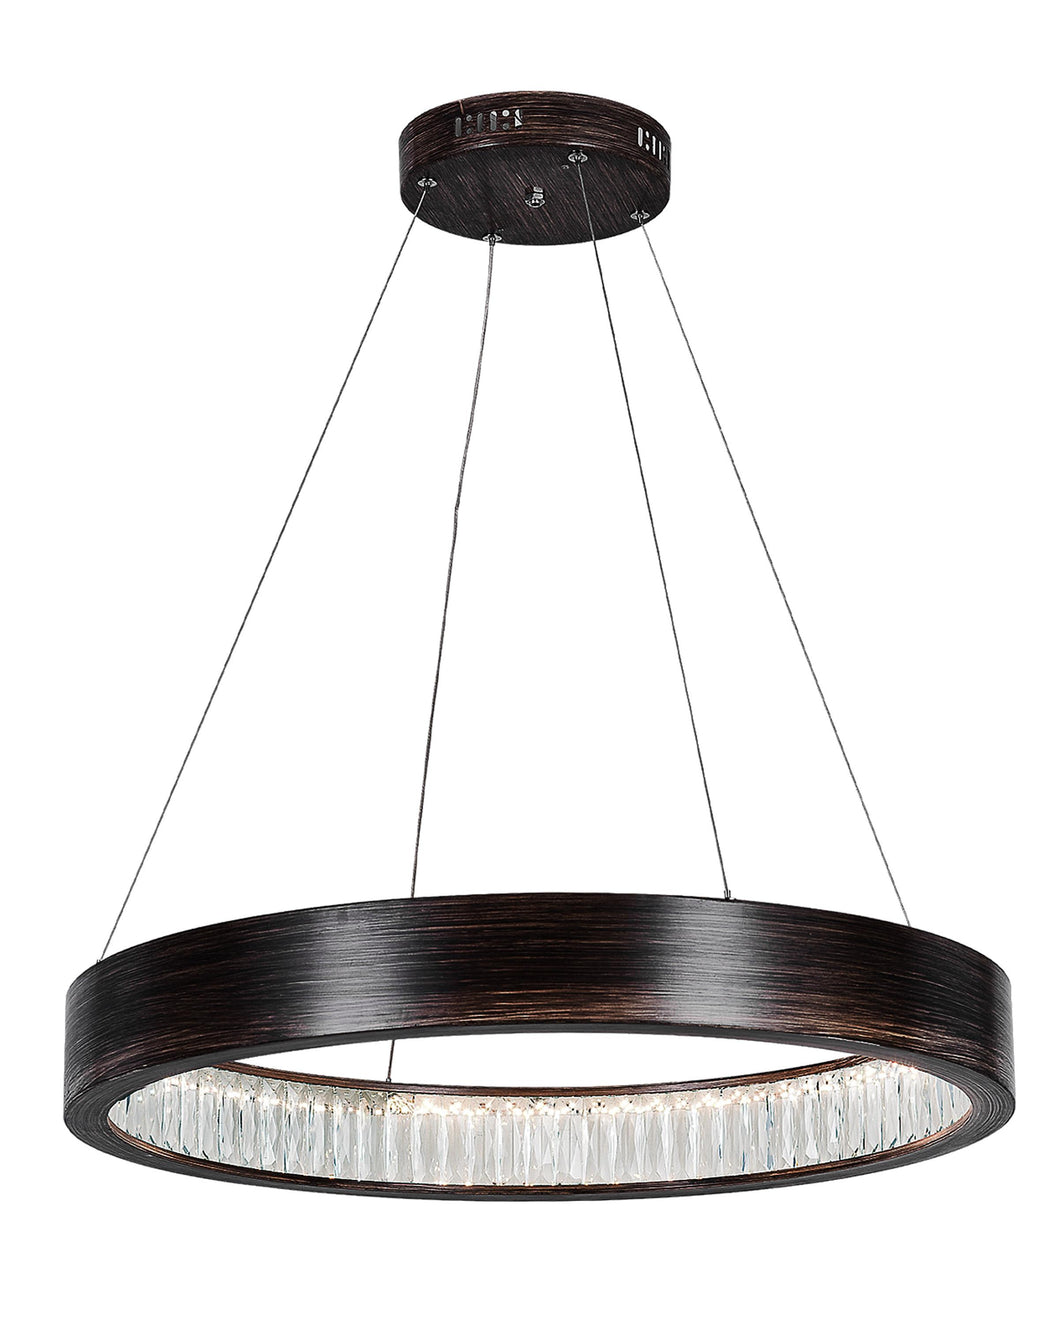 LED Chandelier with Wood Grain Brown Finish